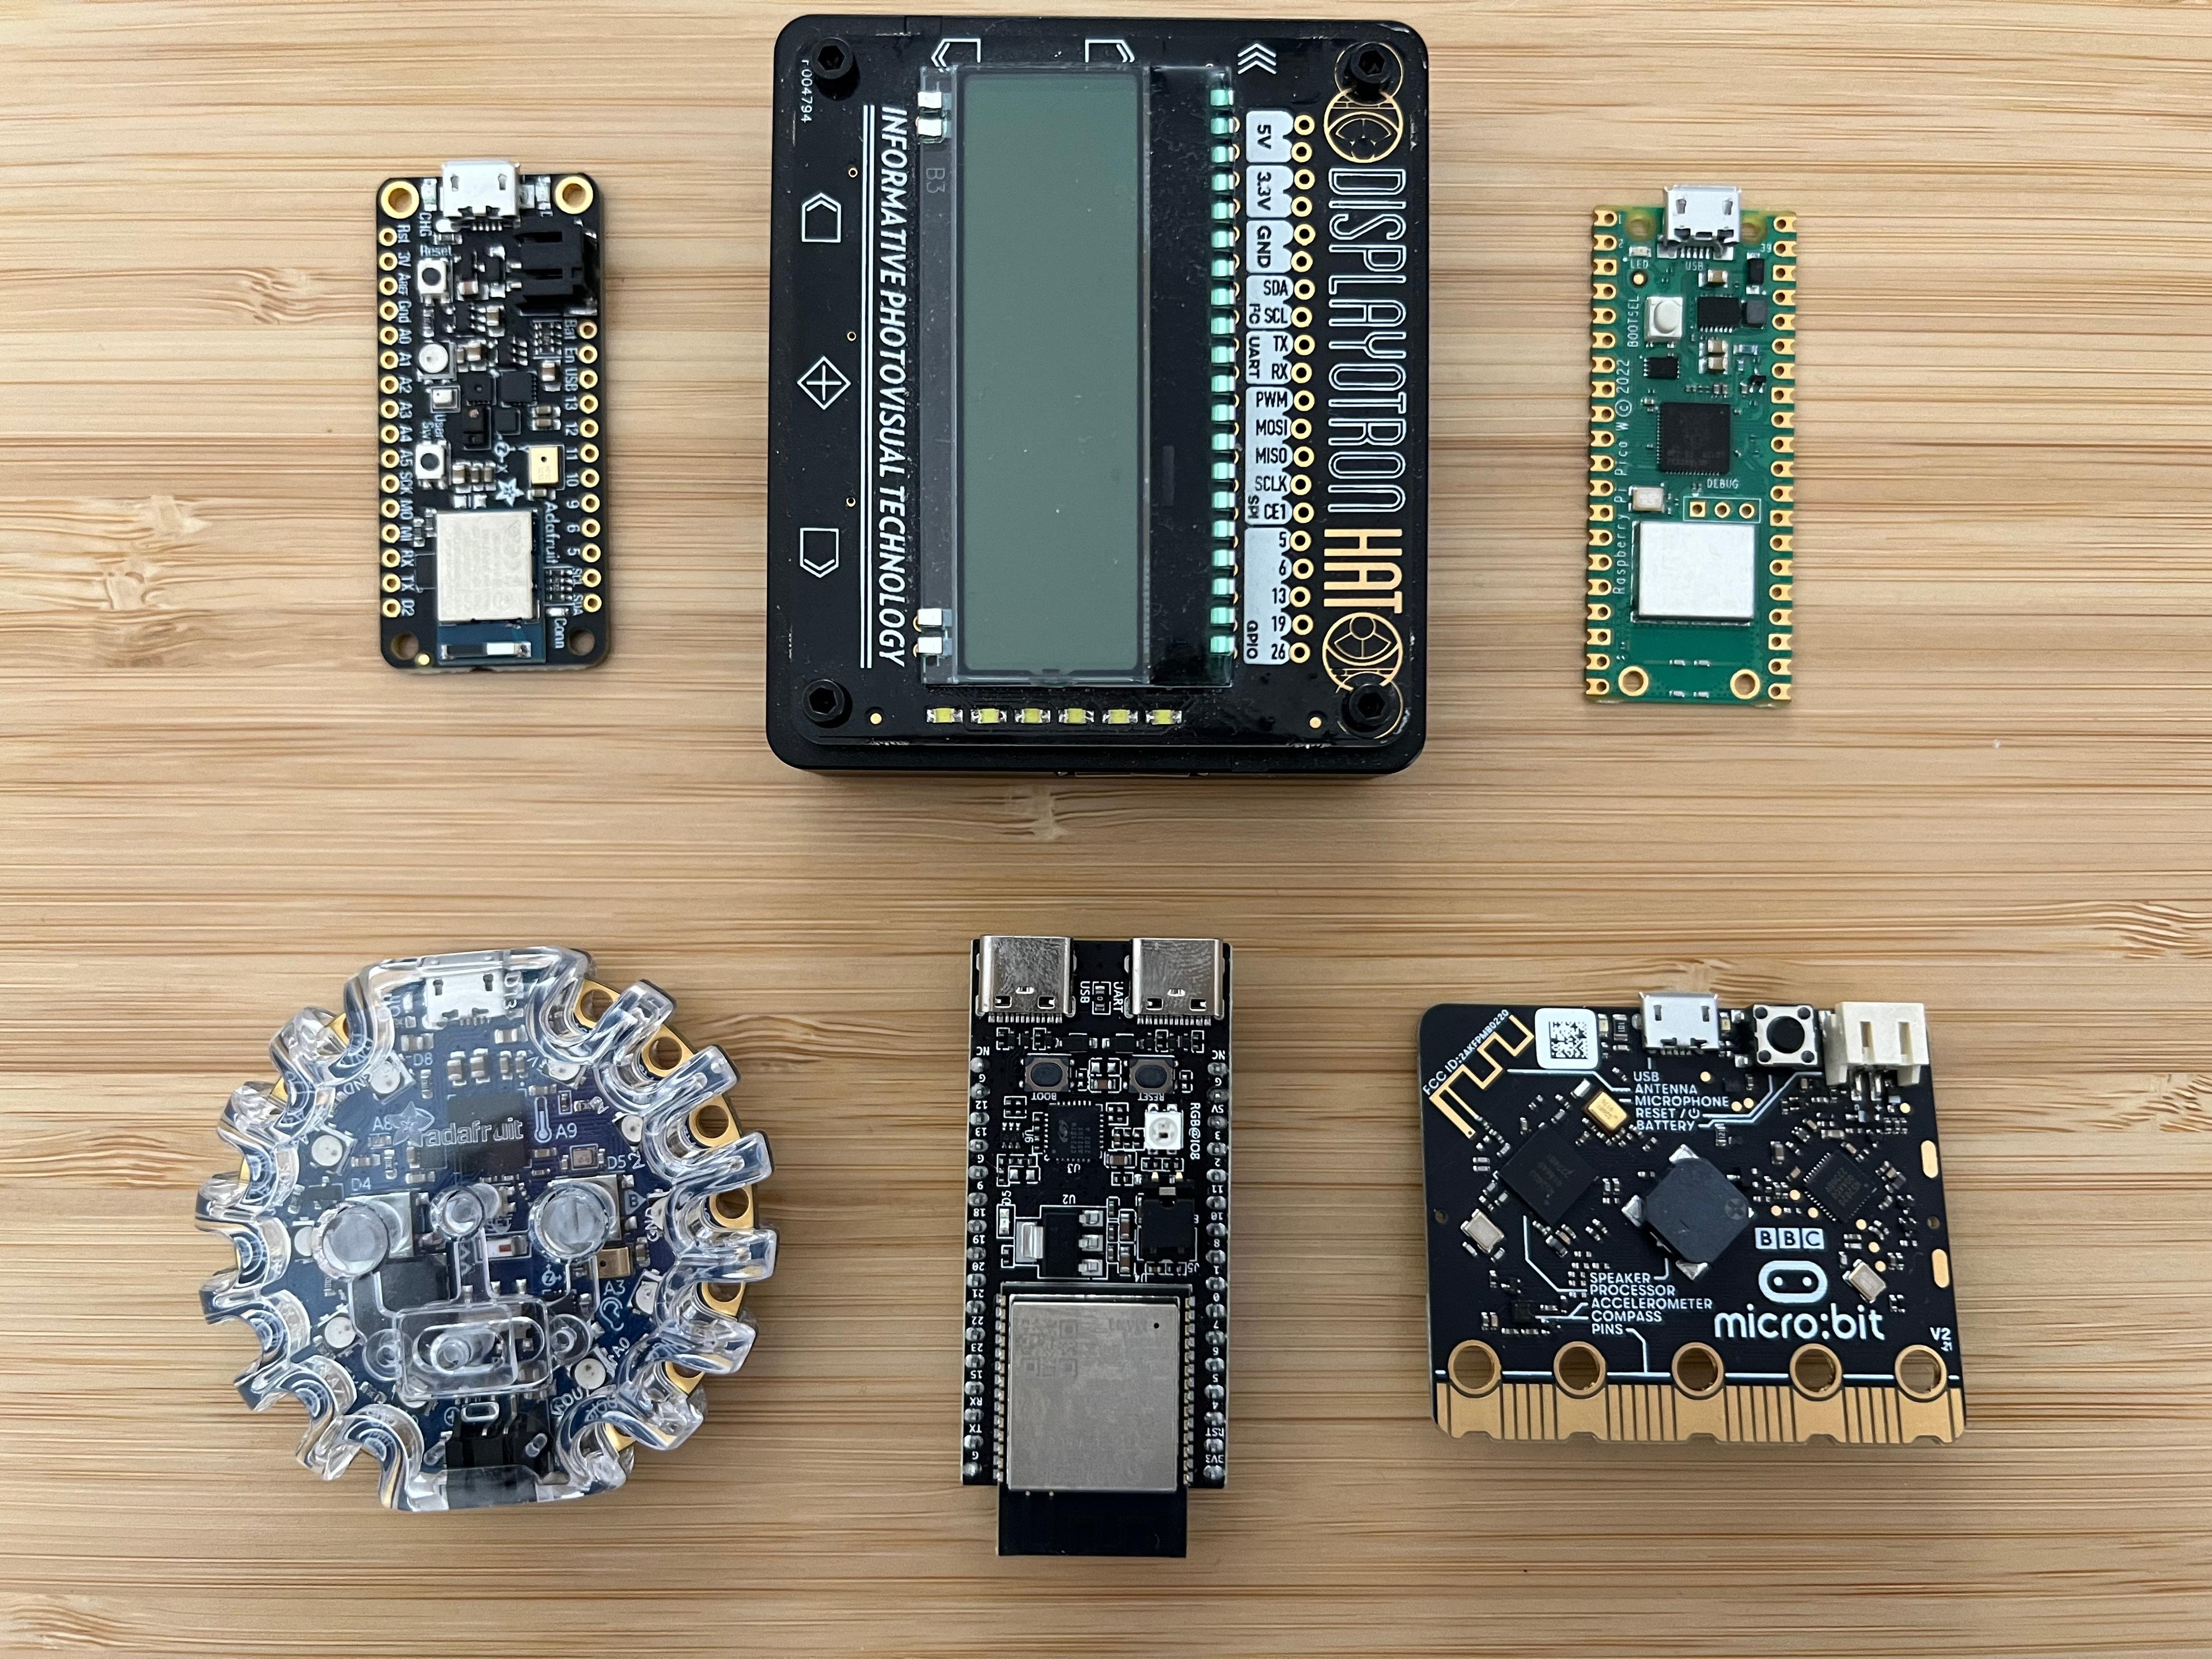 Devices for the project